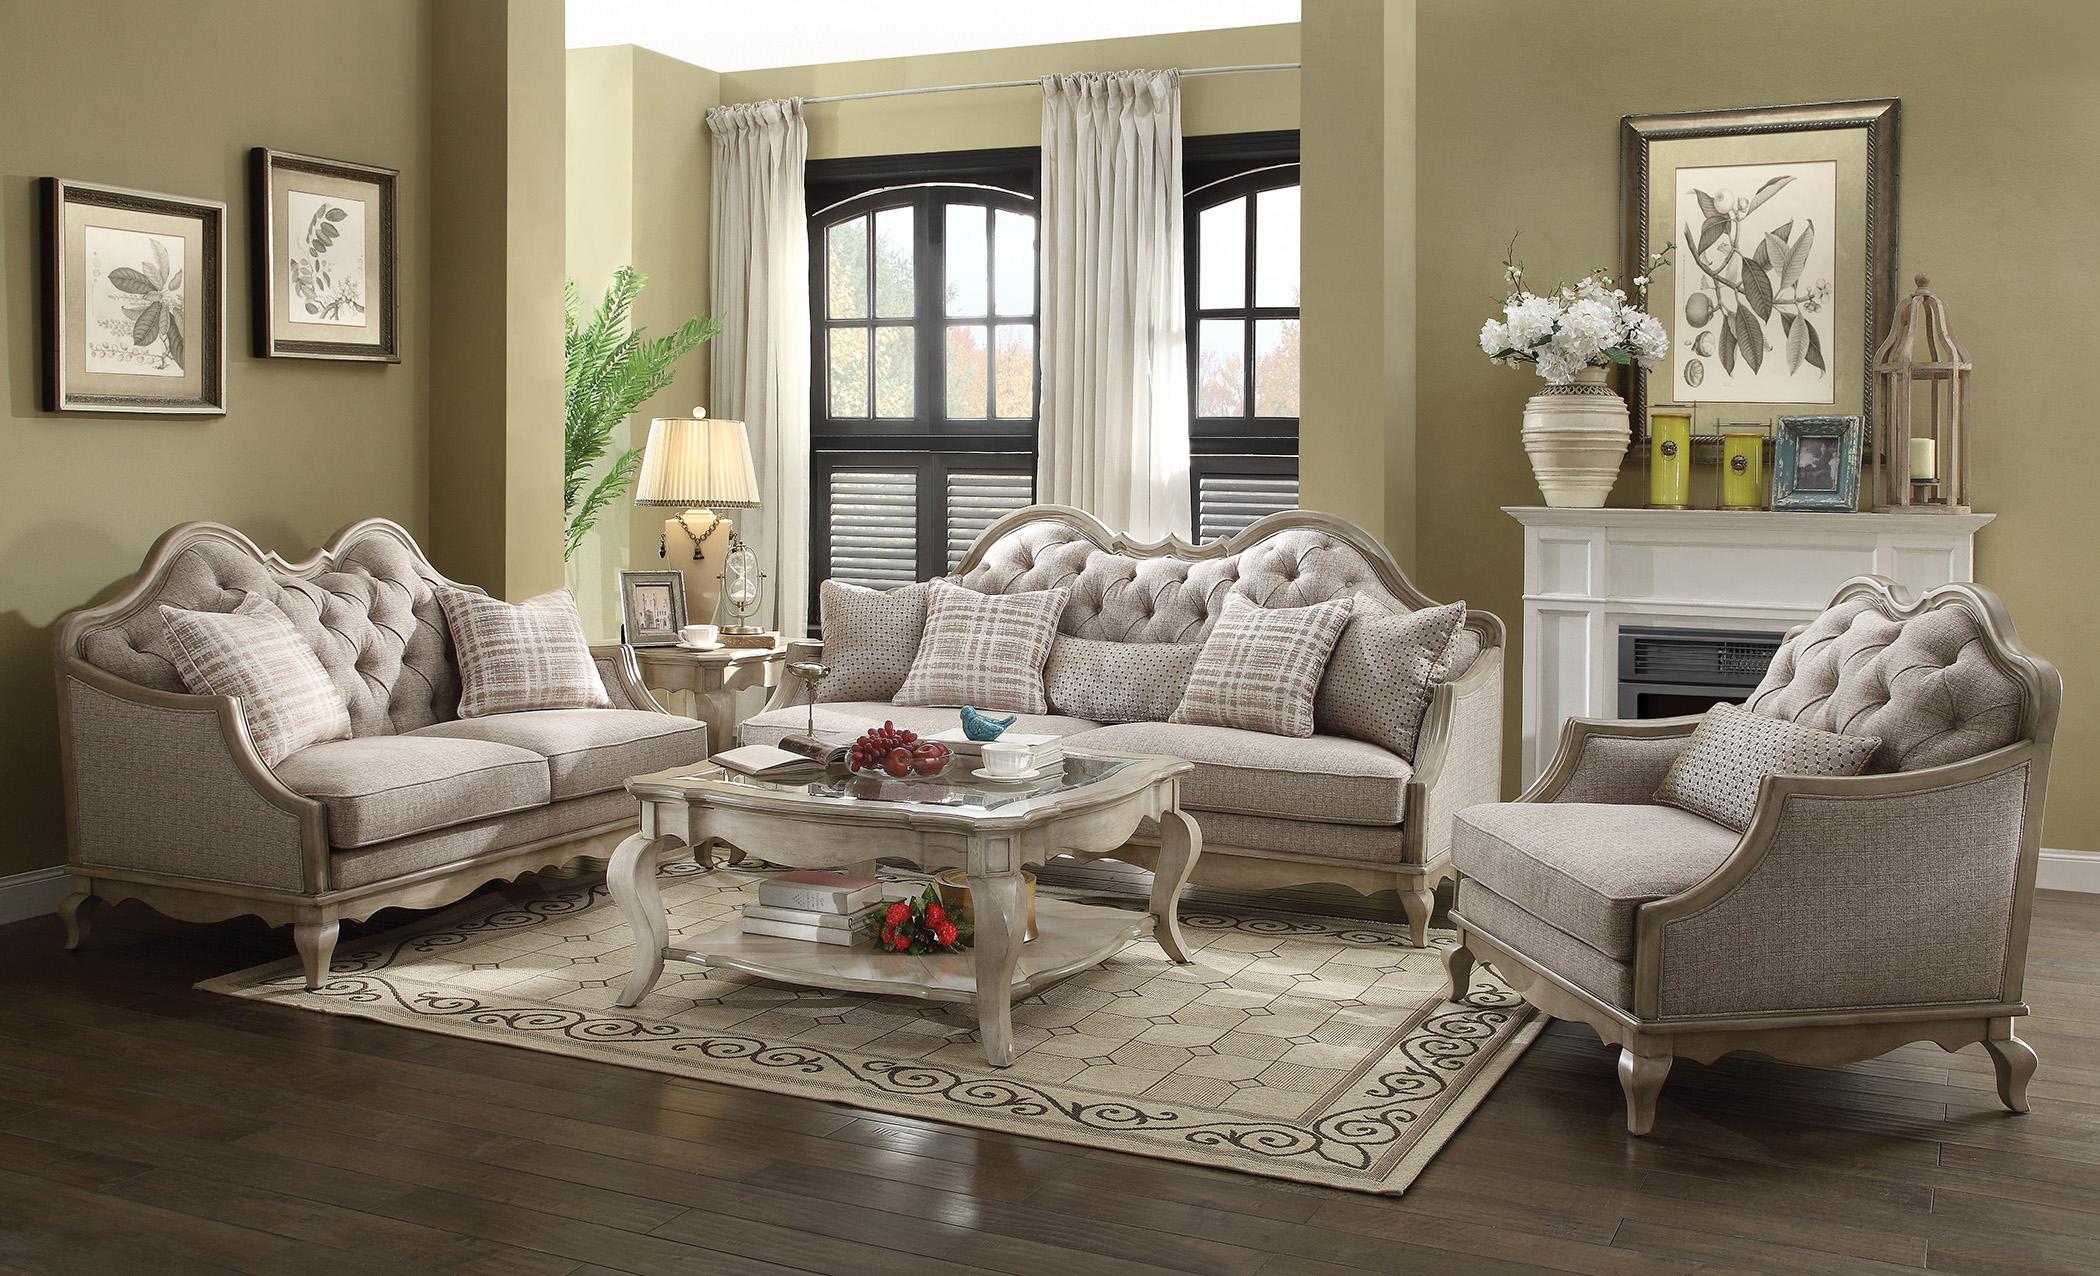 Classic, Traditional Sofa Loveseat Chair Chelmsford-56050 Chelmsford-56050-Set-3 in Taupe, Beige Fabric